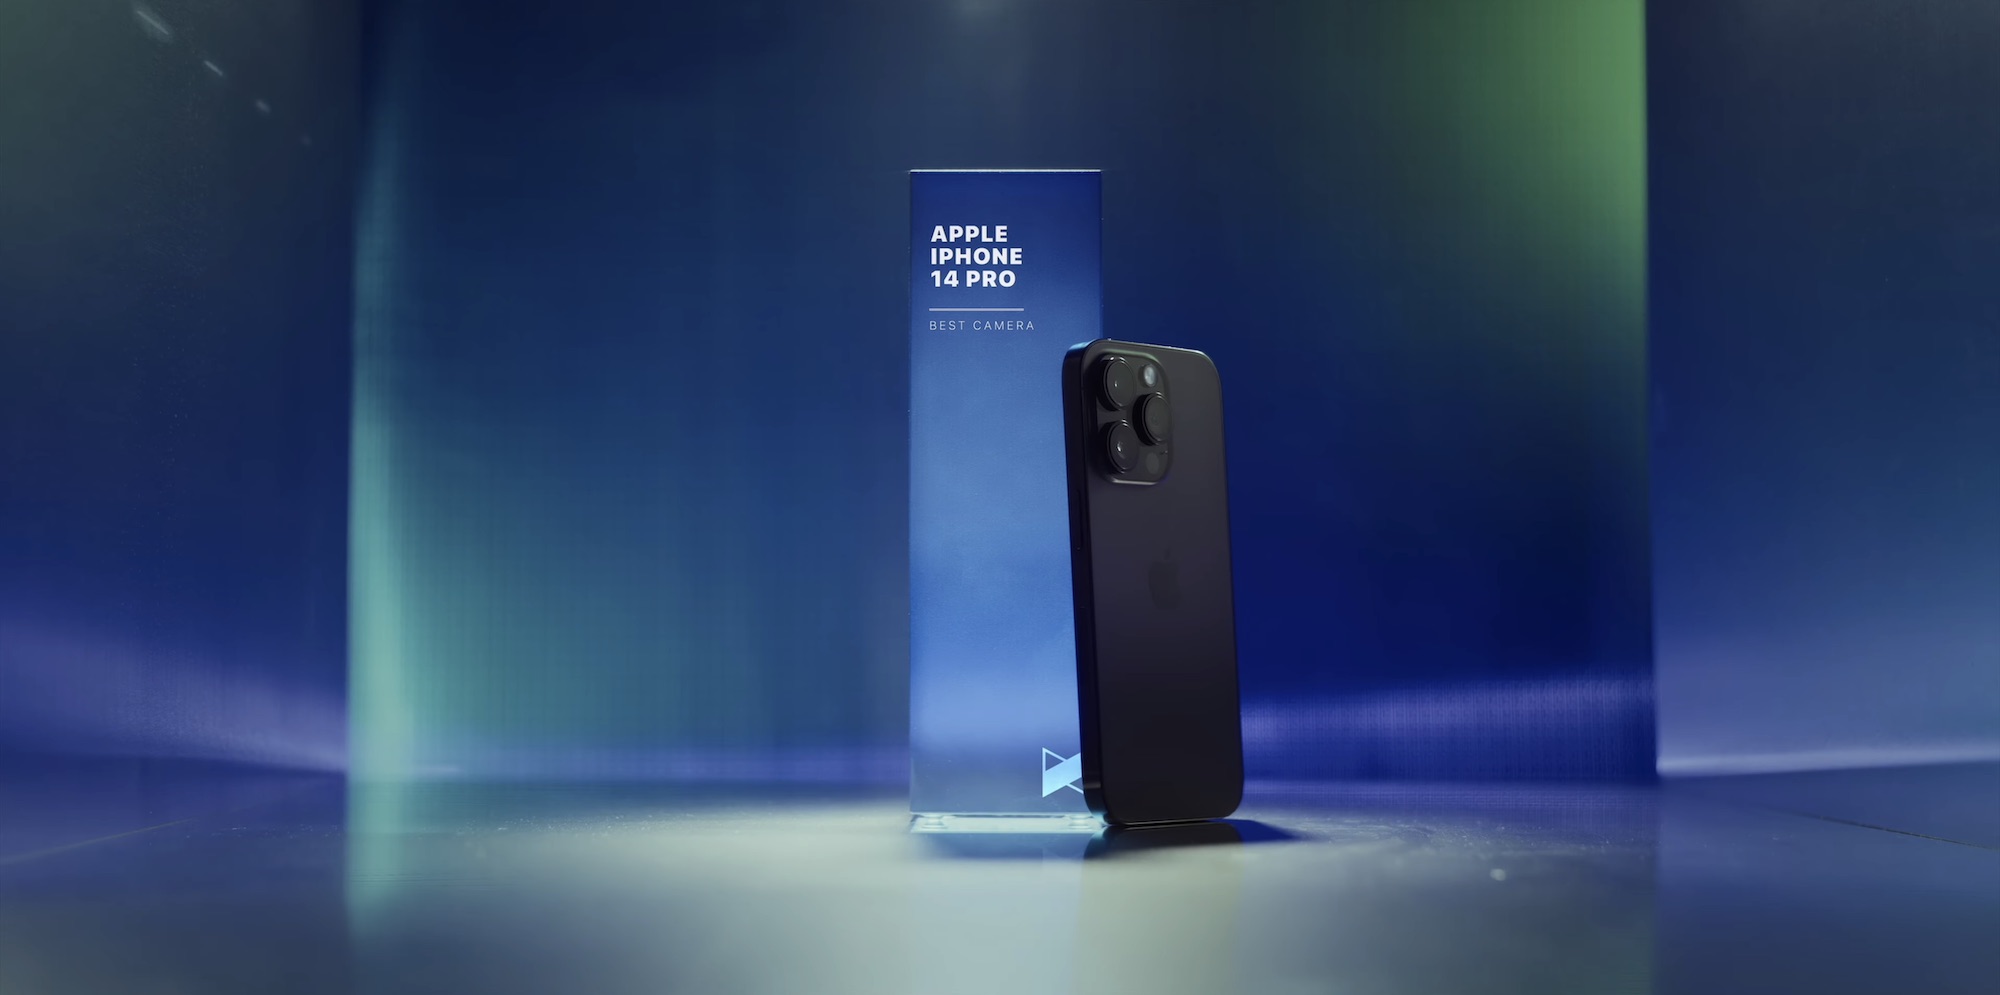 iPhone loses focus of competition in MKBHD's Smartphone Awards 2022